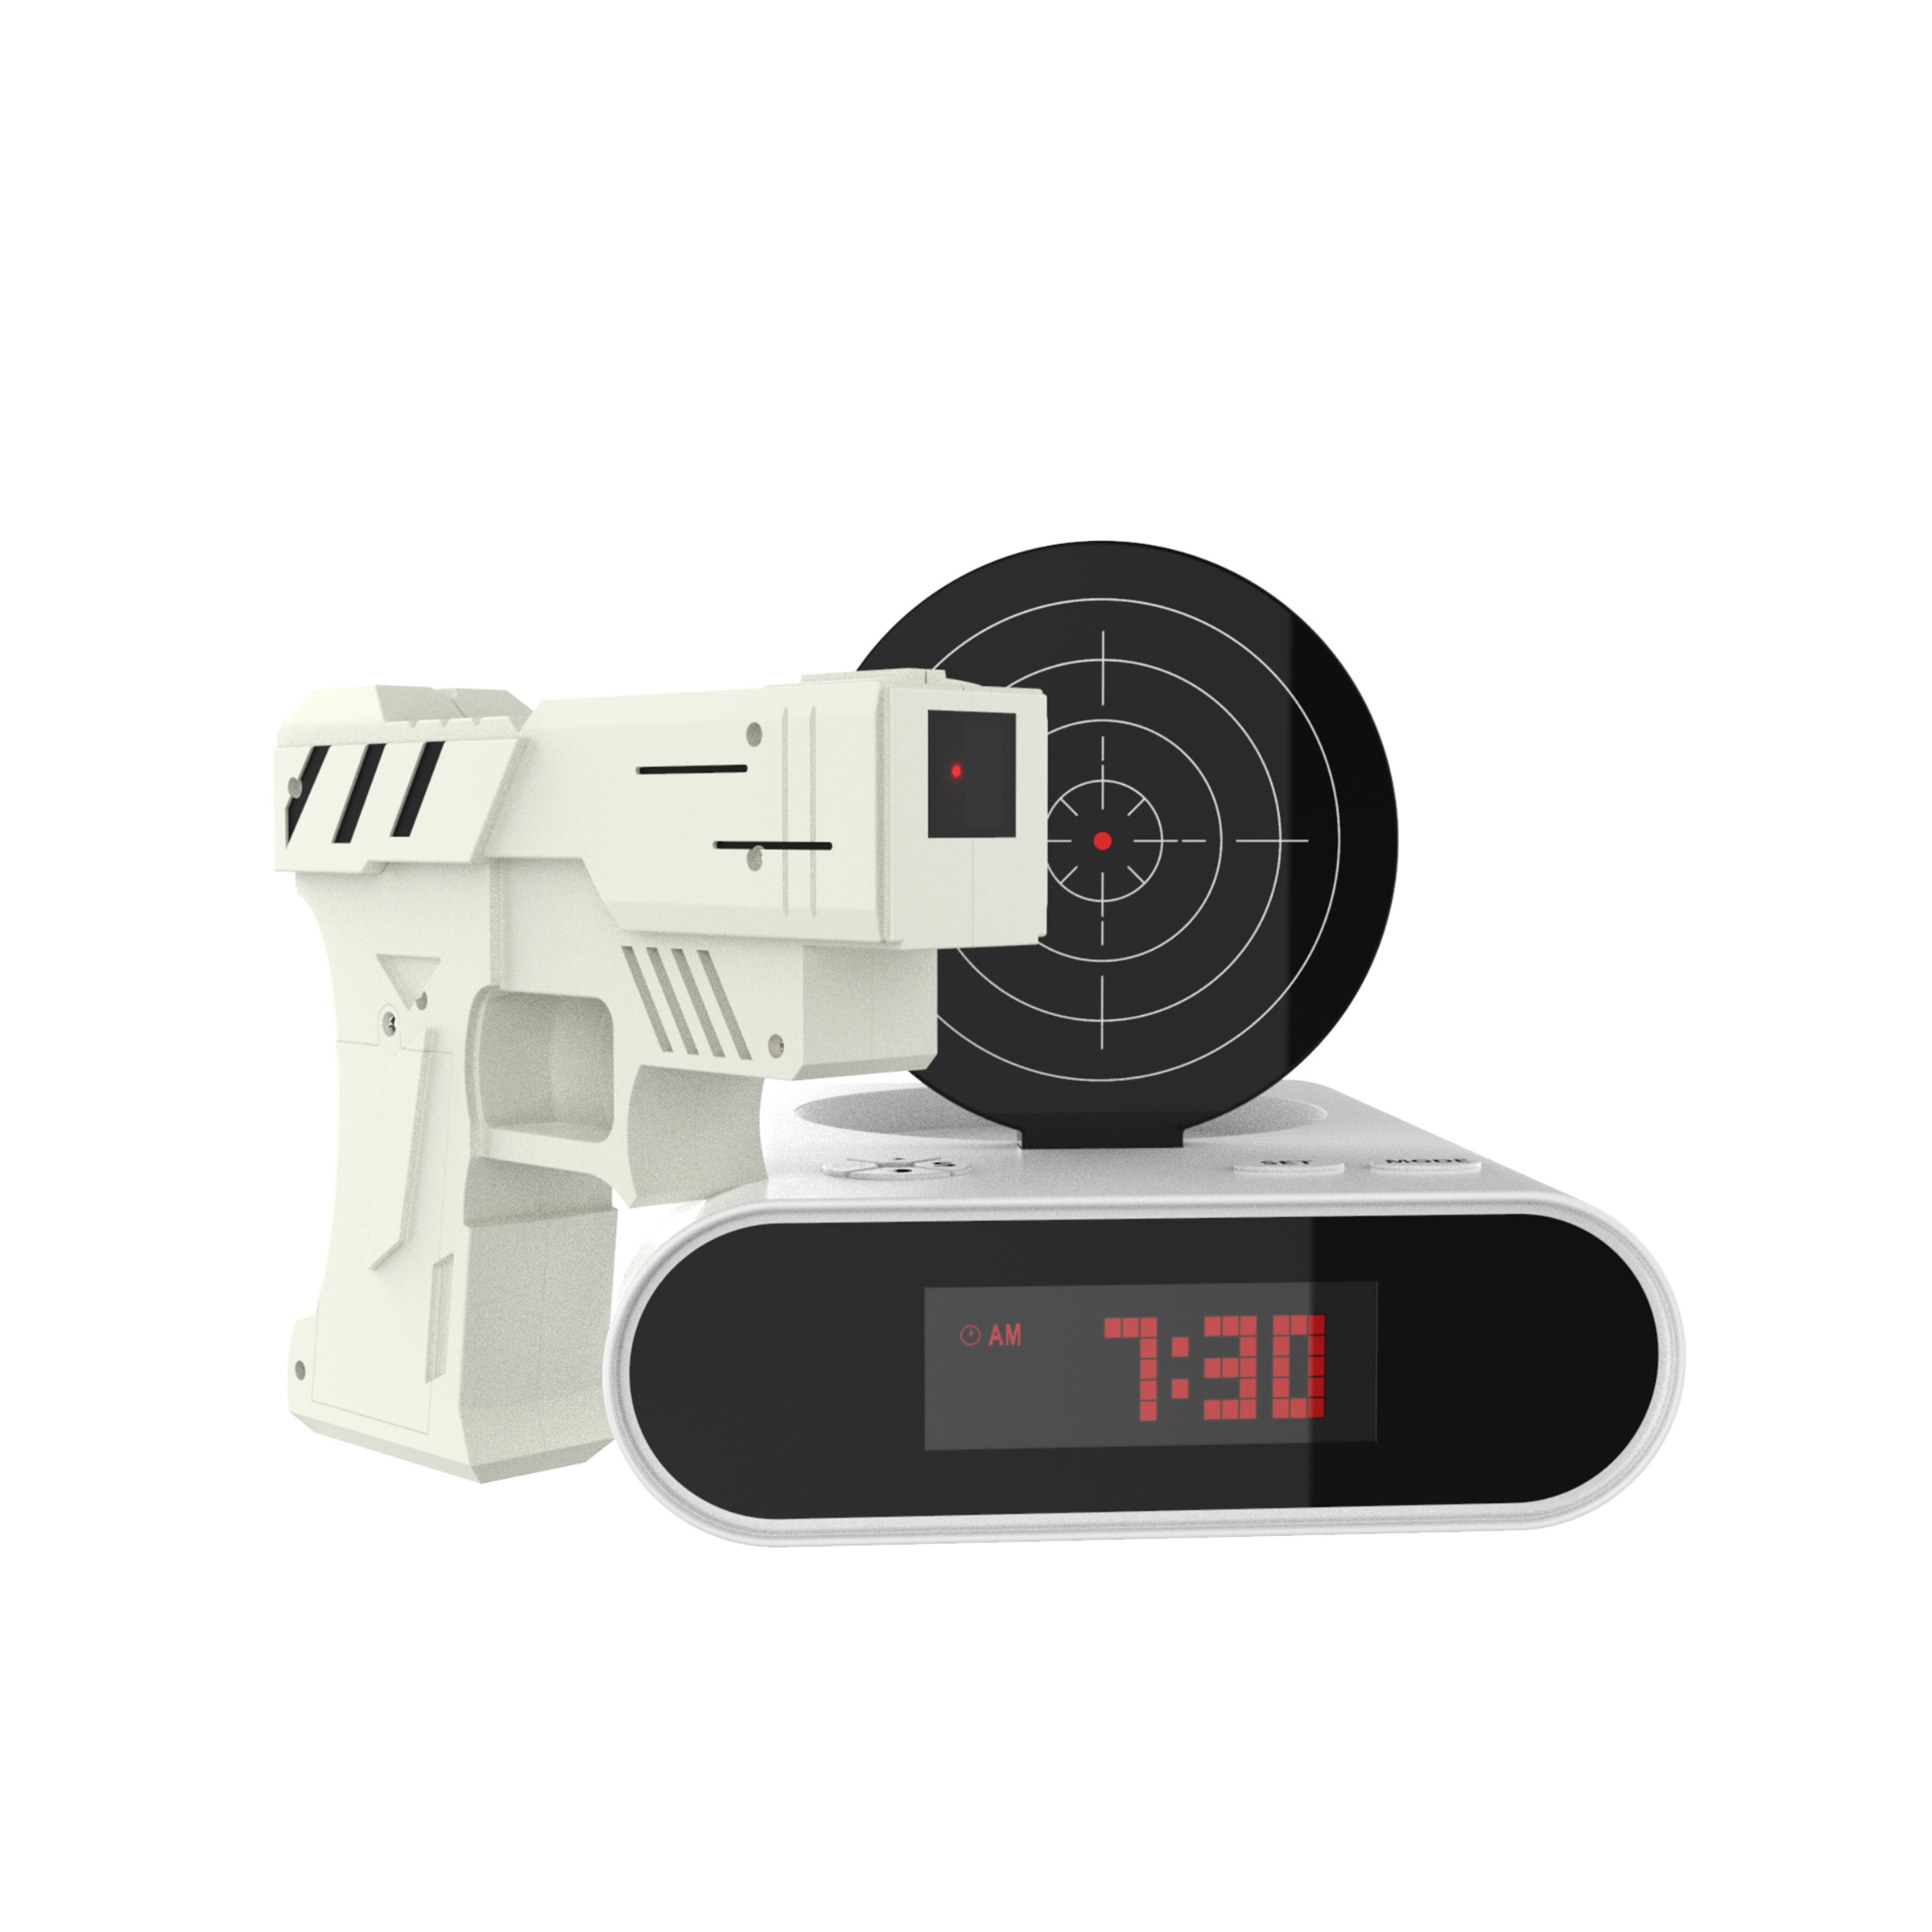 Toy Gun Alarm Clock Game-Infrared Laser Activated Snooze Target, Record Personalized Alarm, 12 Hour Digital Display, Sound Effect by TM Games - image 1 of 6